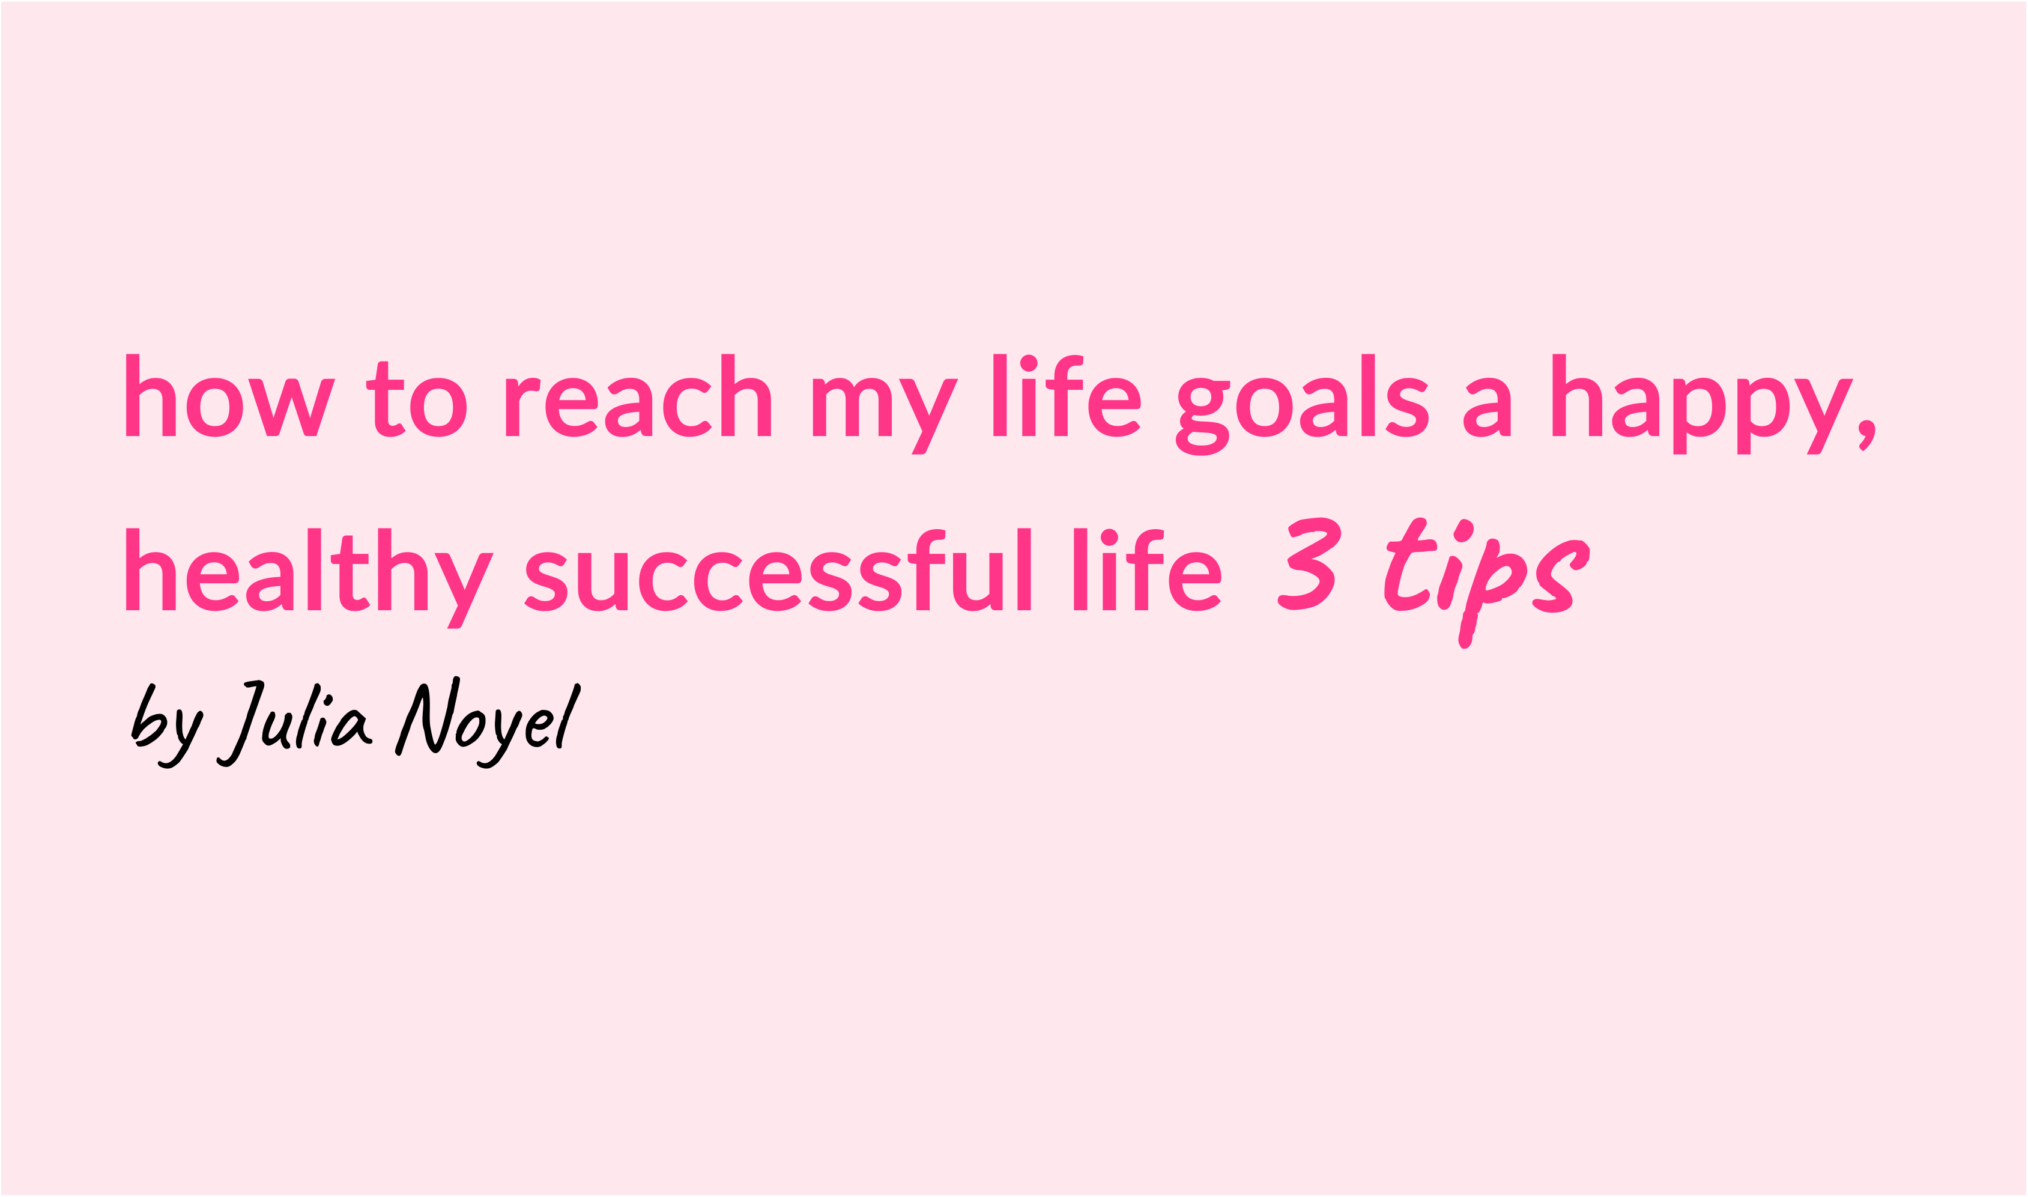 how to reach my life goals a happy, healthy successful life 3 tips